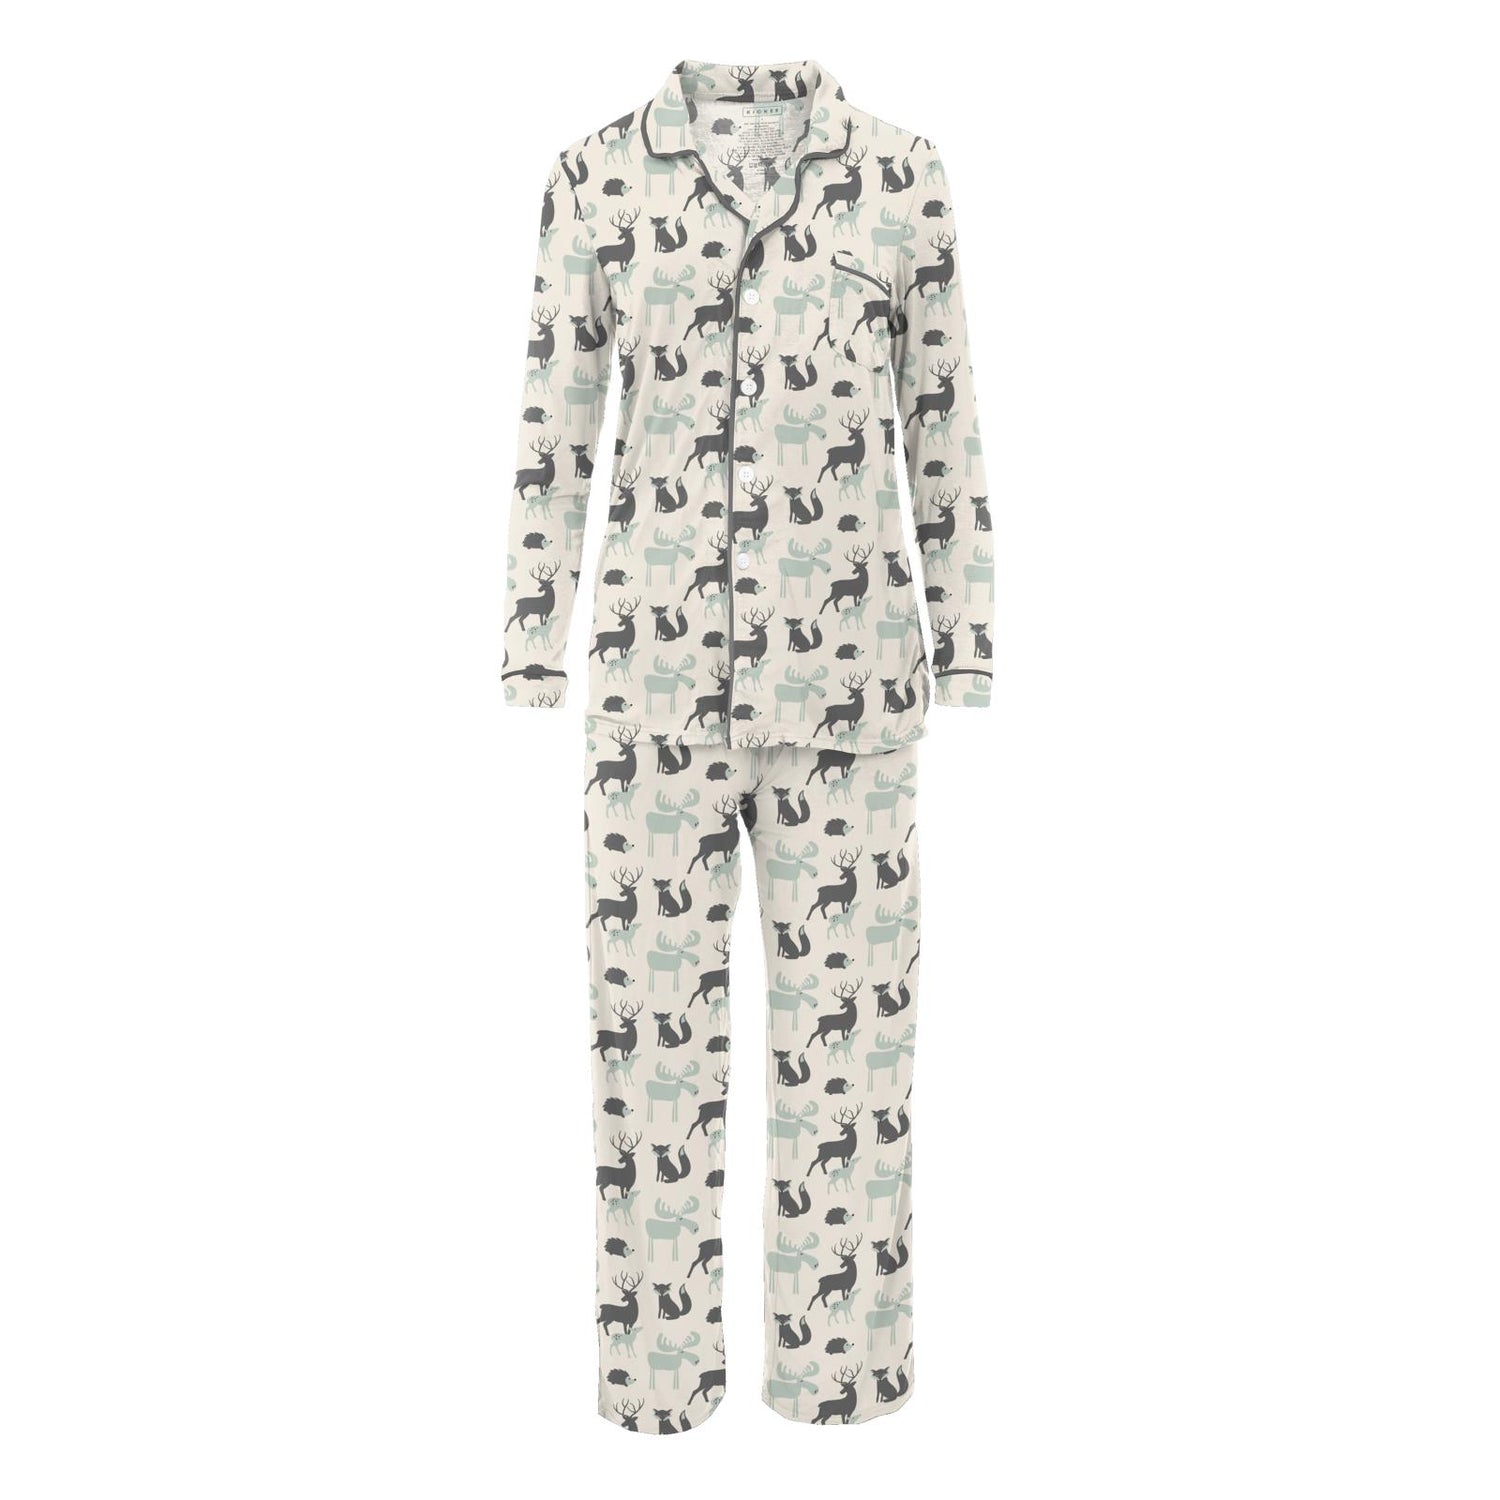 Women's Print Long Sleeve Collared Pajama Set in Natural Forest Animals